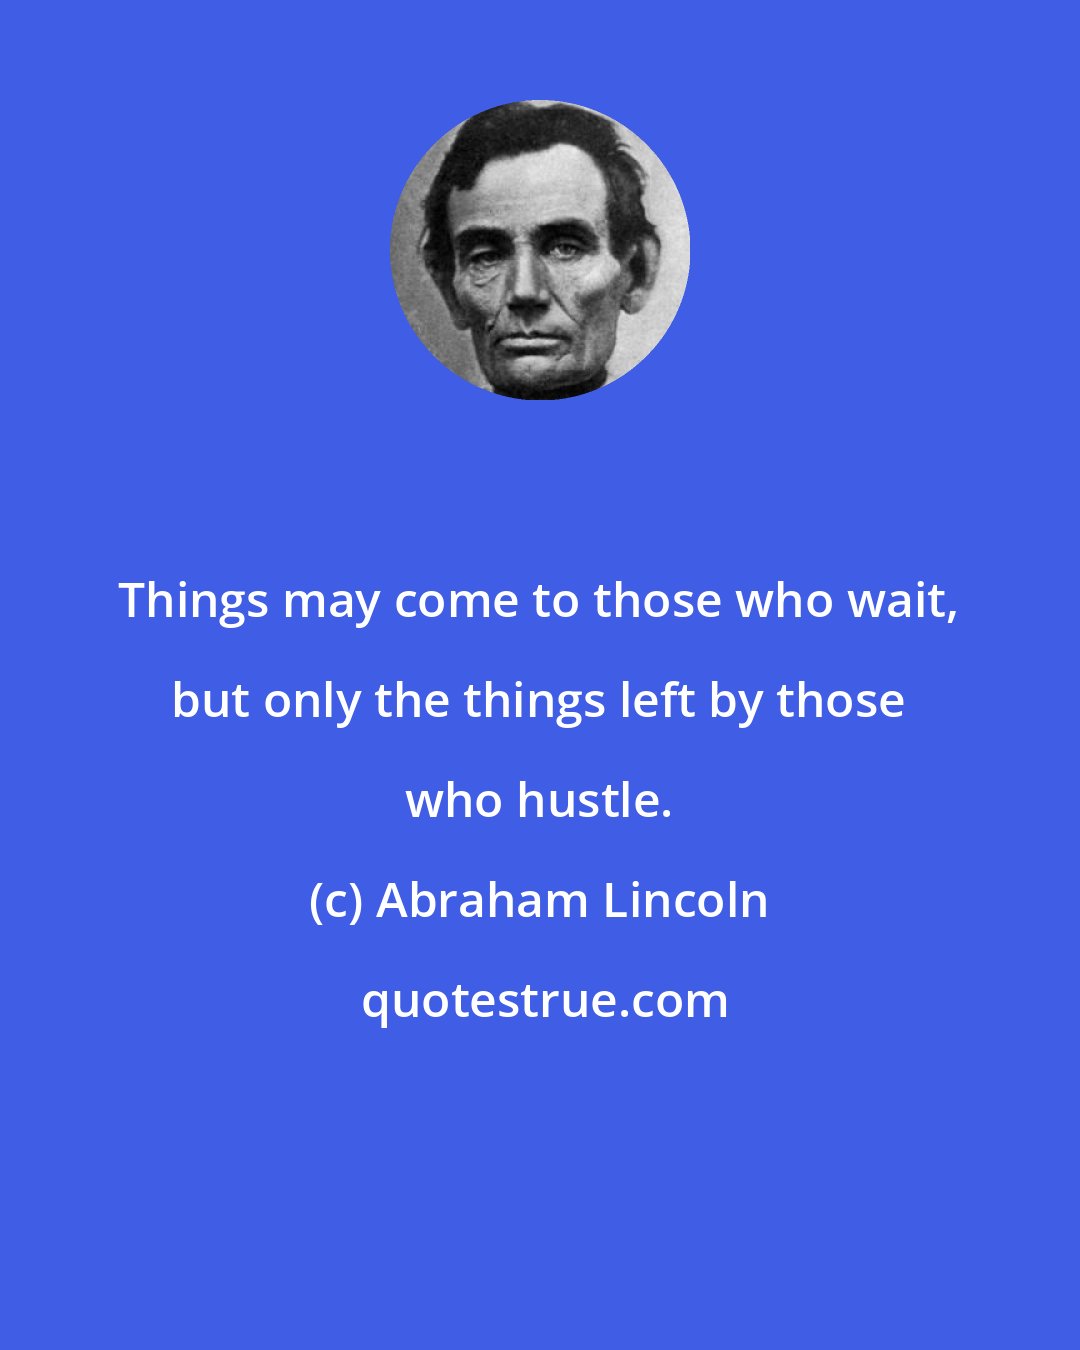 Abraham Lincoln: Things may come to those who wait, but only the things left by those who hustle.